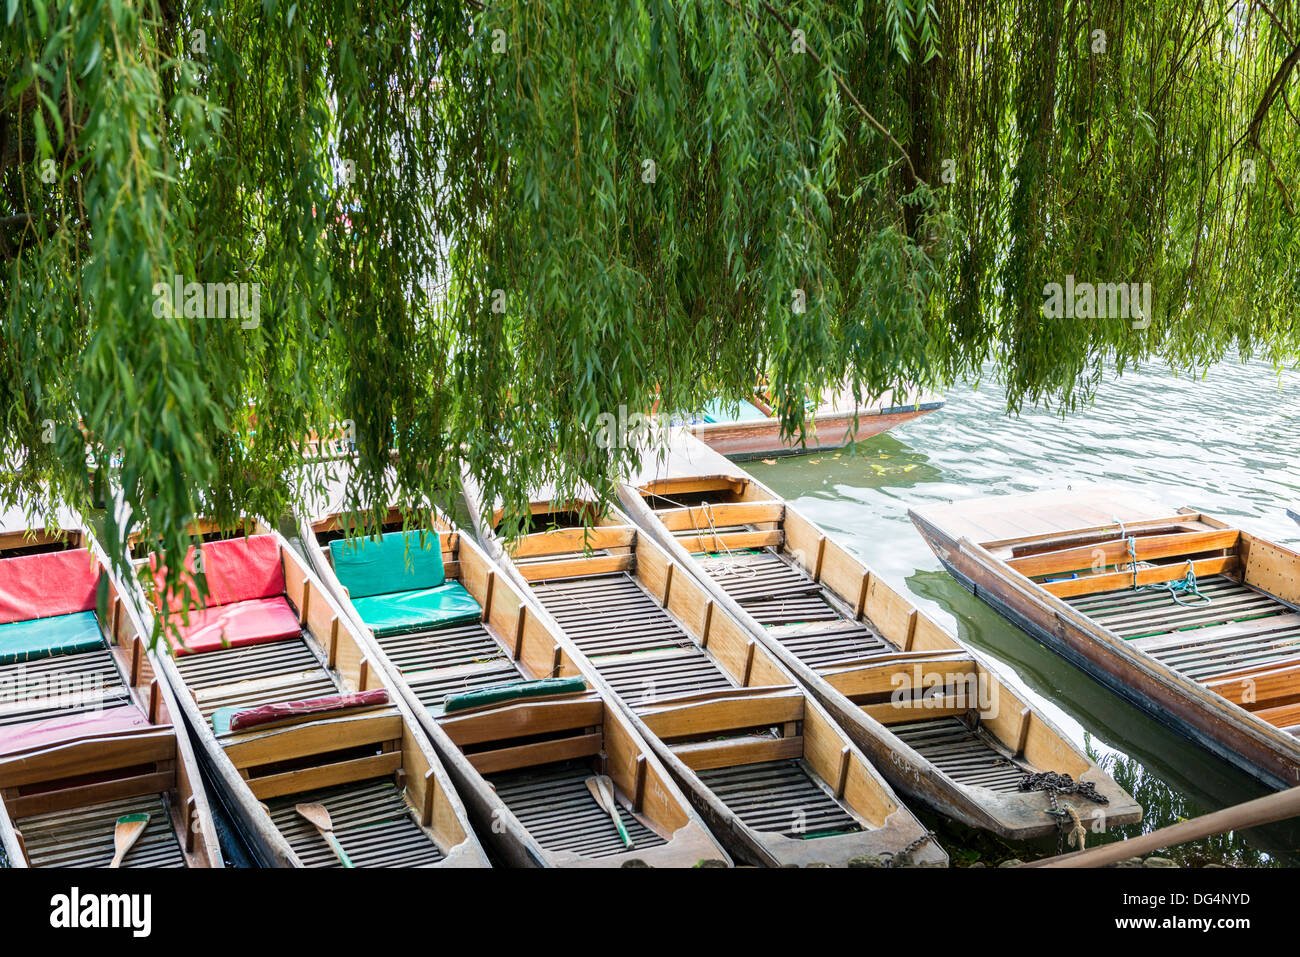 High angle tight crop of gondolas ashore side by side under weeping willow Stock Photo